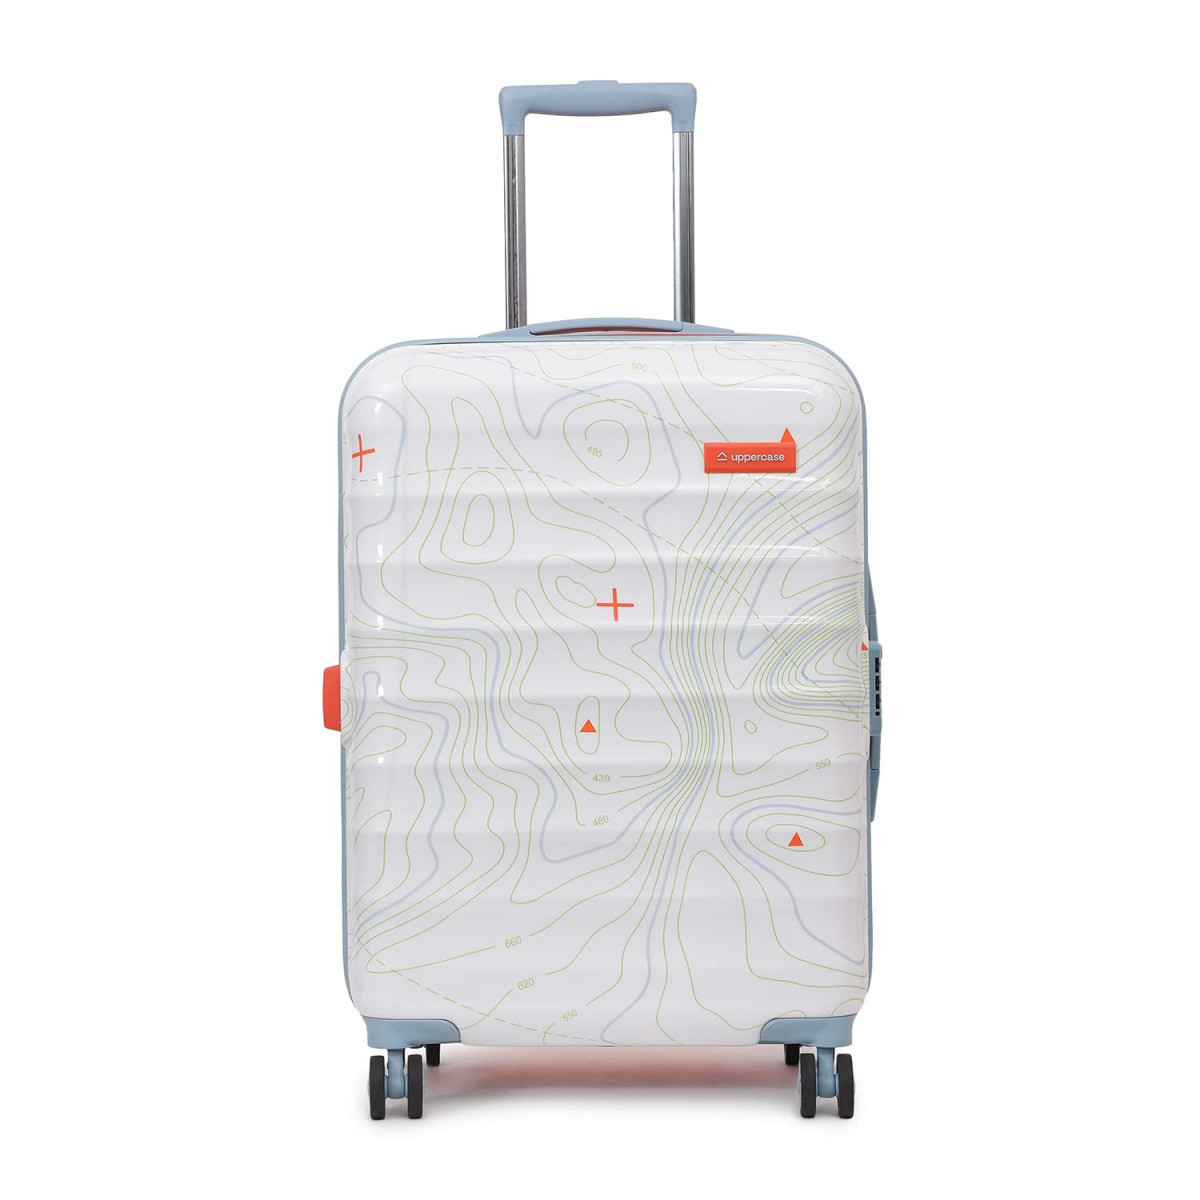 uppercase Topo Trolley Bag Set Of 2 SM Hardsided Cabin  Check-In Suitcase Polycarbonate Spinner Luggage Tsa Lock Anti-Theft Zippers 2000 Days Warranty Orange  White 285 X 46 X 655 Cm